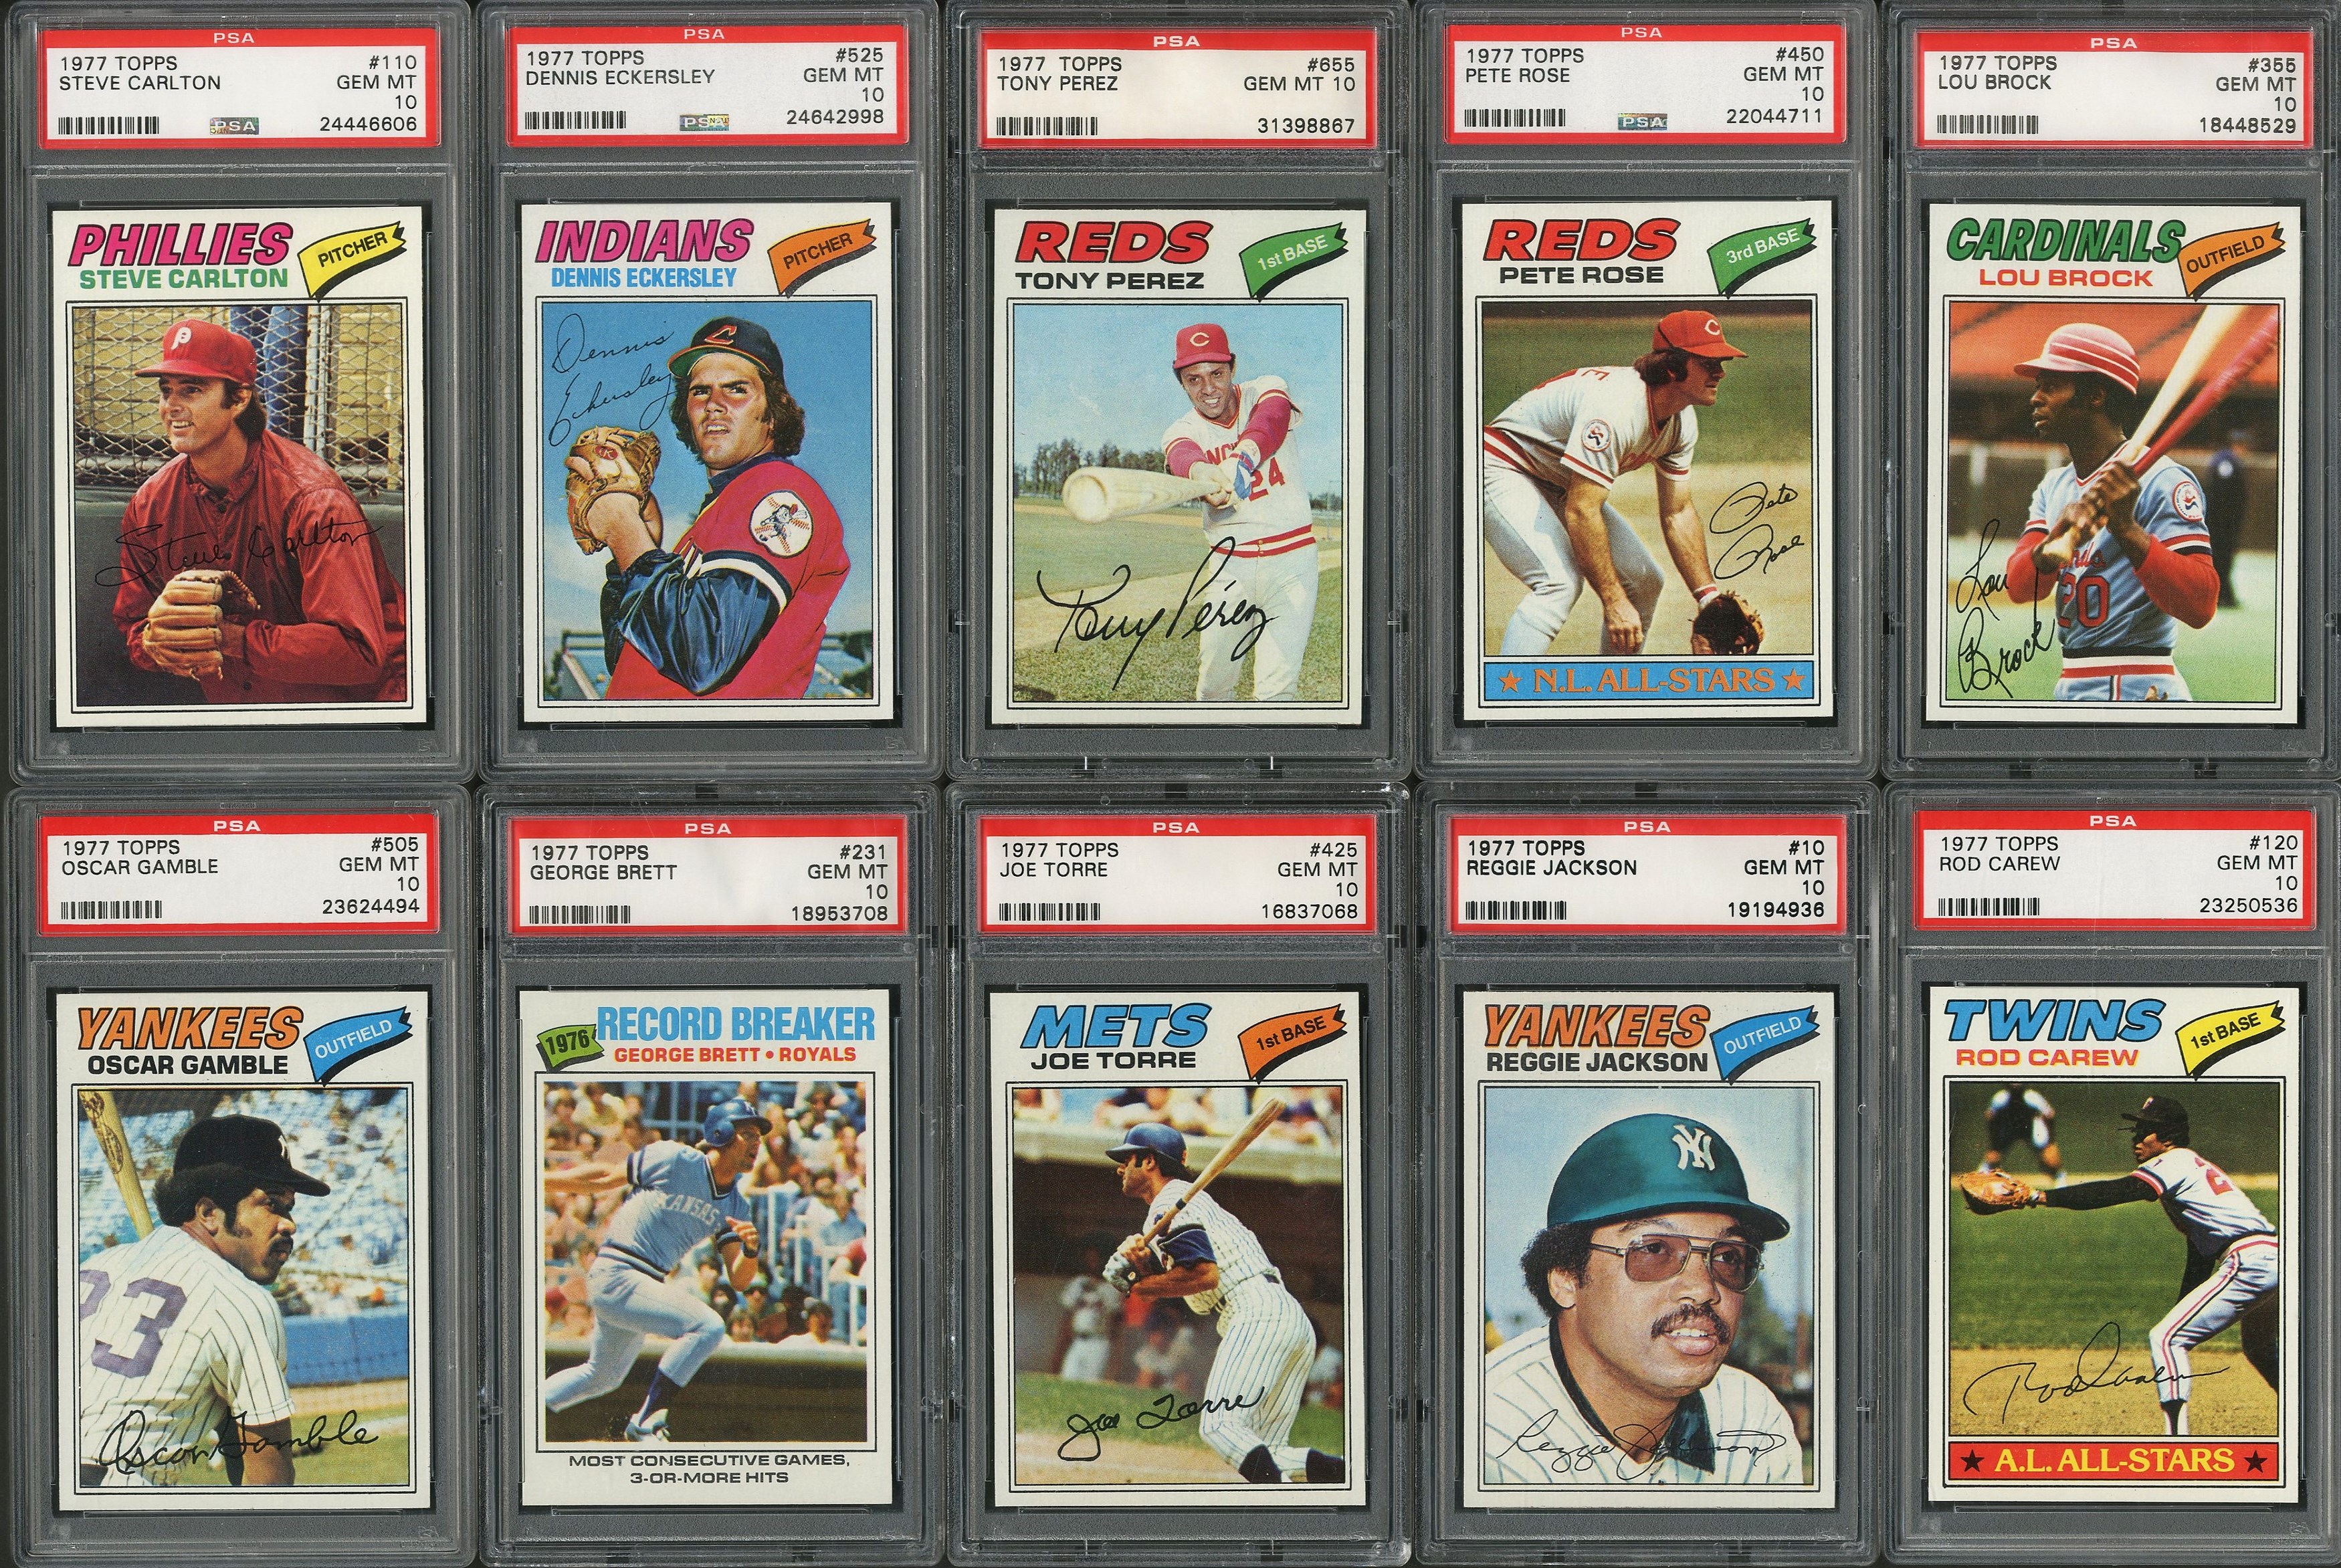 Baseball and Trading Cards - 1977 Topps PSA GEM MINT 10 Graded Partial Set (225+)